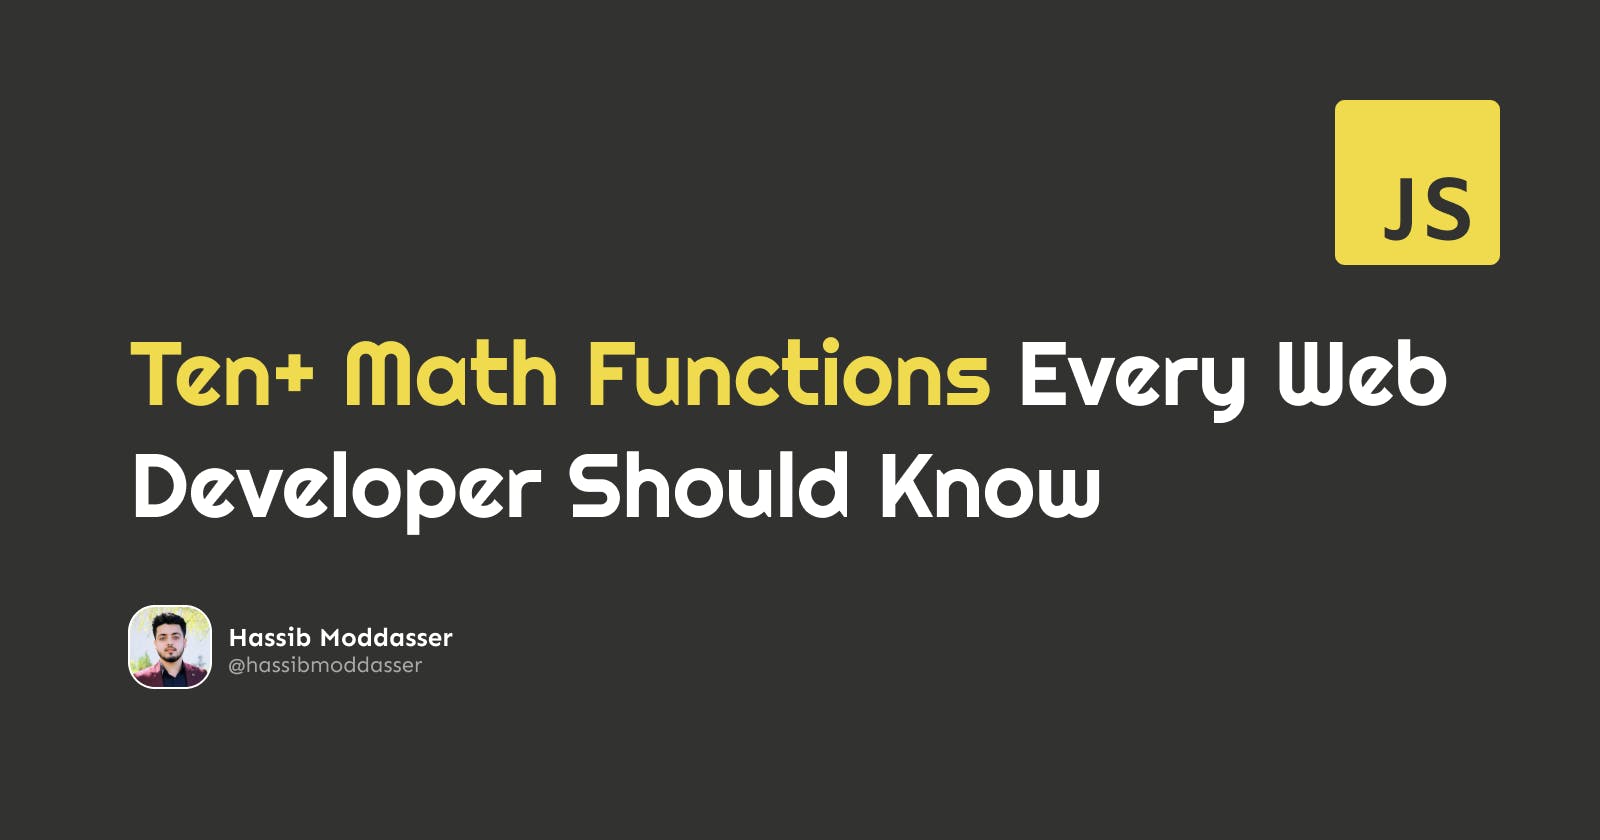 Ten+ Math Functions Every JavaScript Developer Should Know